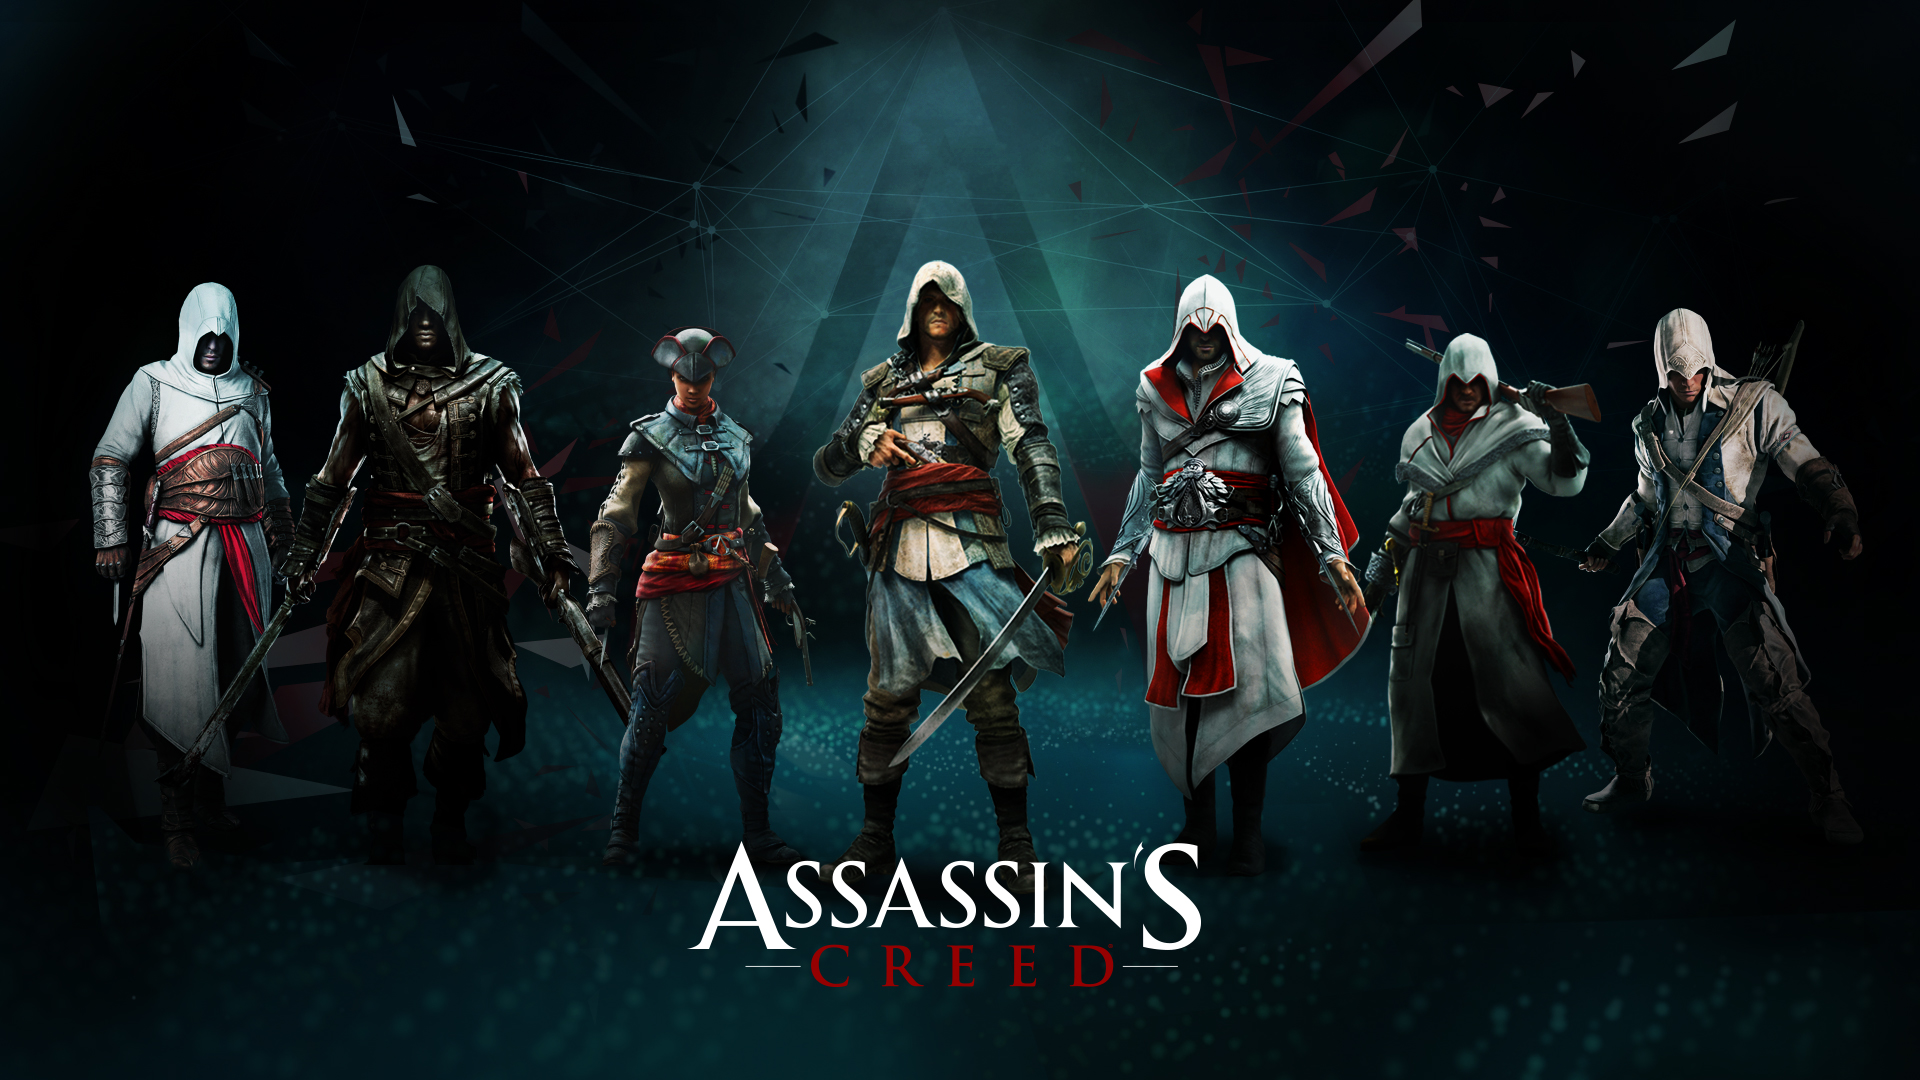 Altair Assassin 039 S Creed Connor Assassin 039 S Creed Edward Kenway Ezio Assassin 039 S Creed 1920x1080